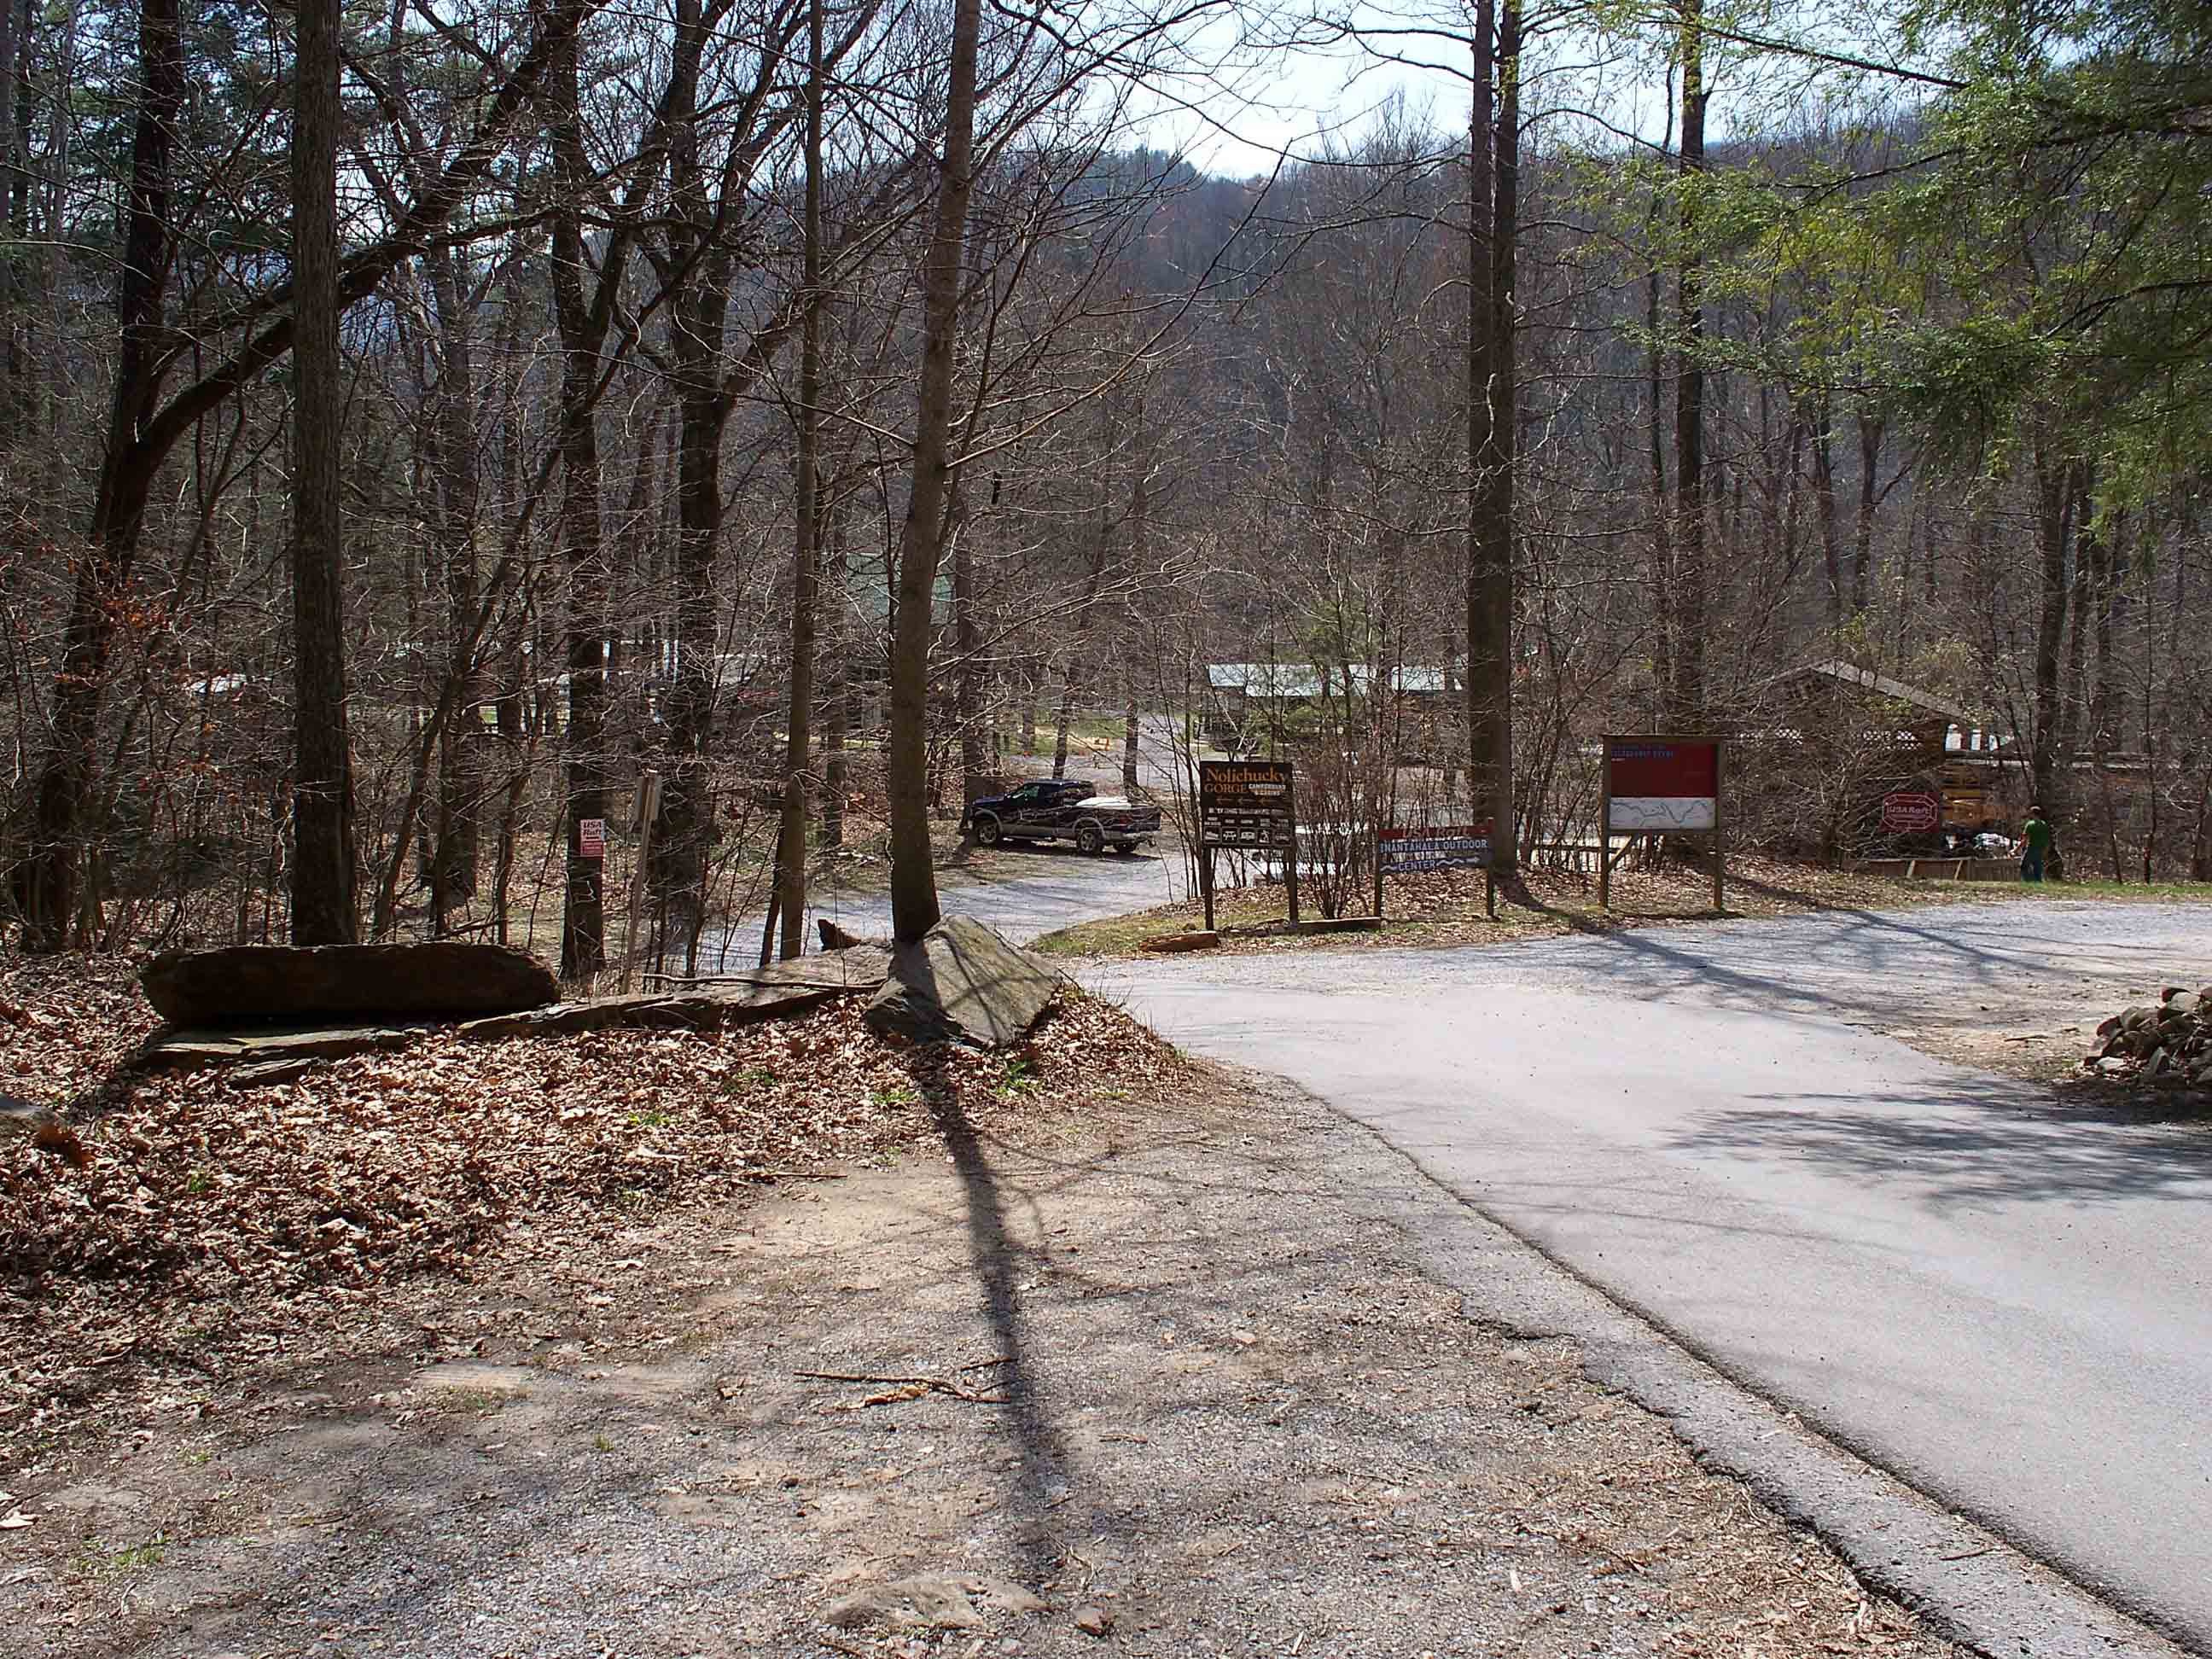 mm 18.8 Picture of Nolichucky campground and rafting.  Courtesy judyverlinhowell@hotmail.com